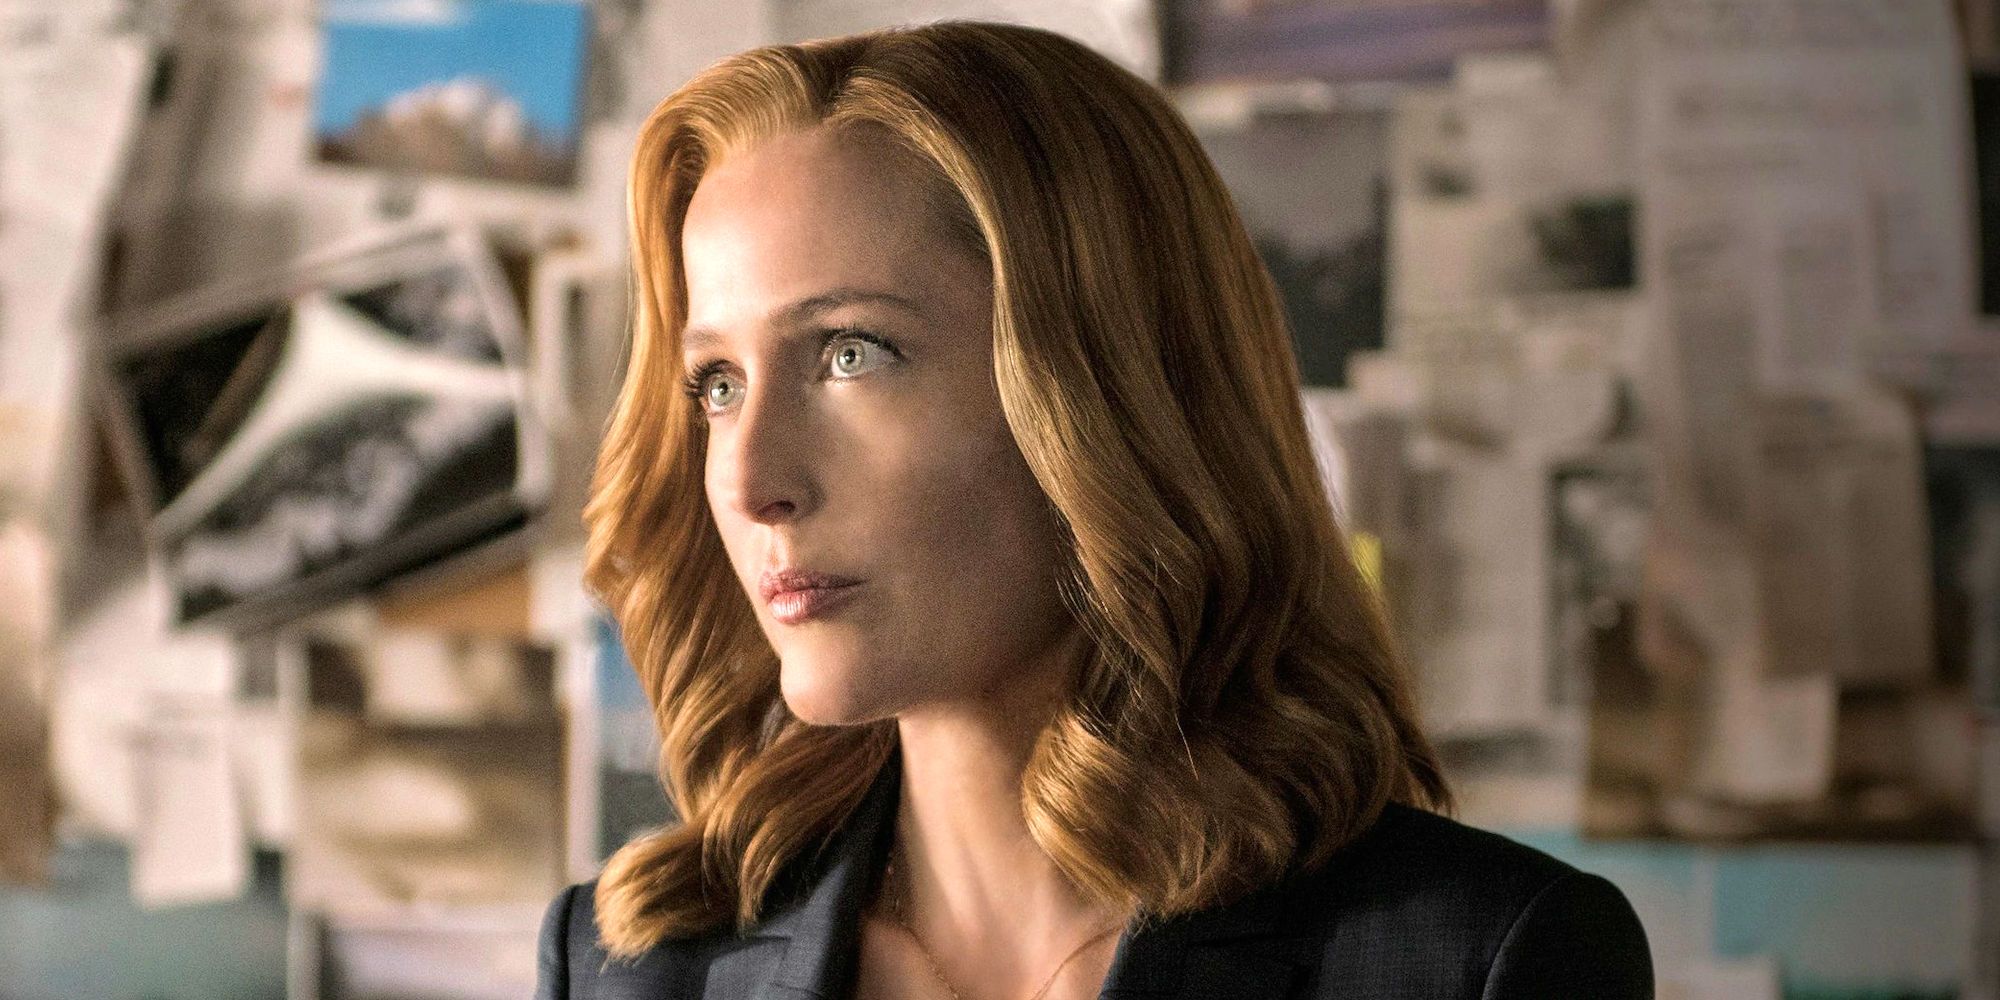 The X-Files - Gillian Anderson as Scully in Season 10